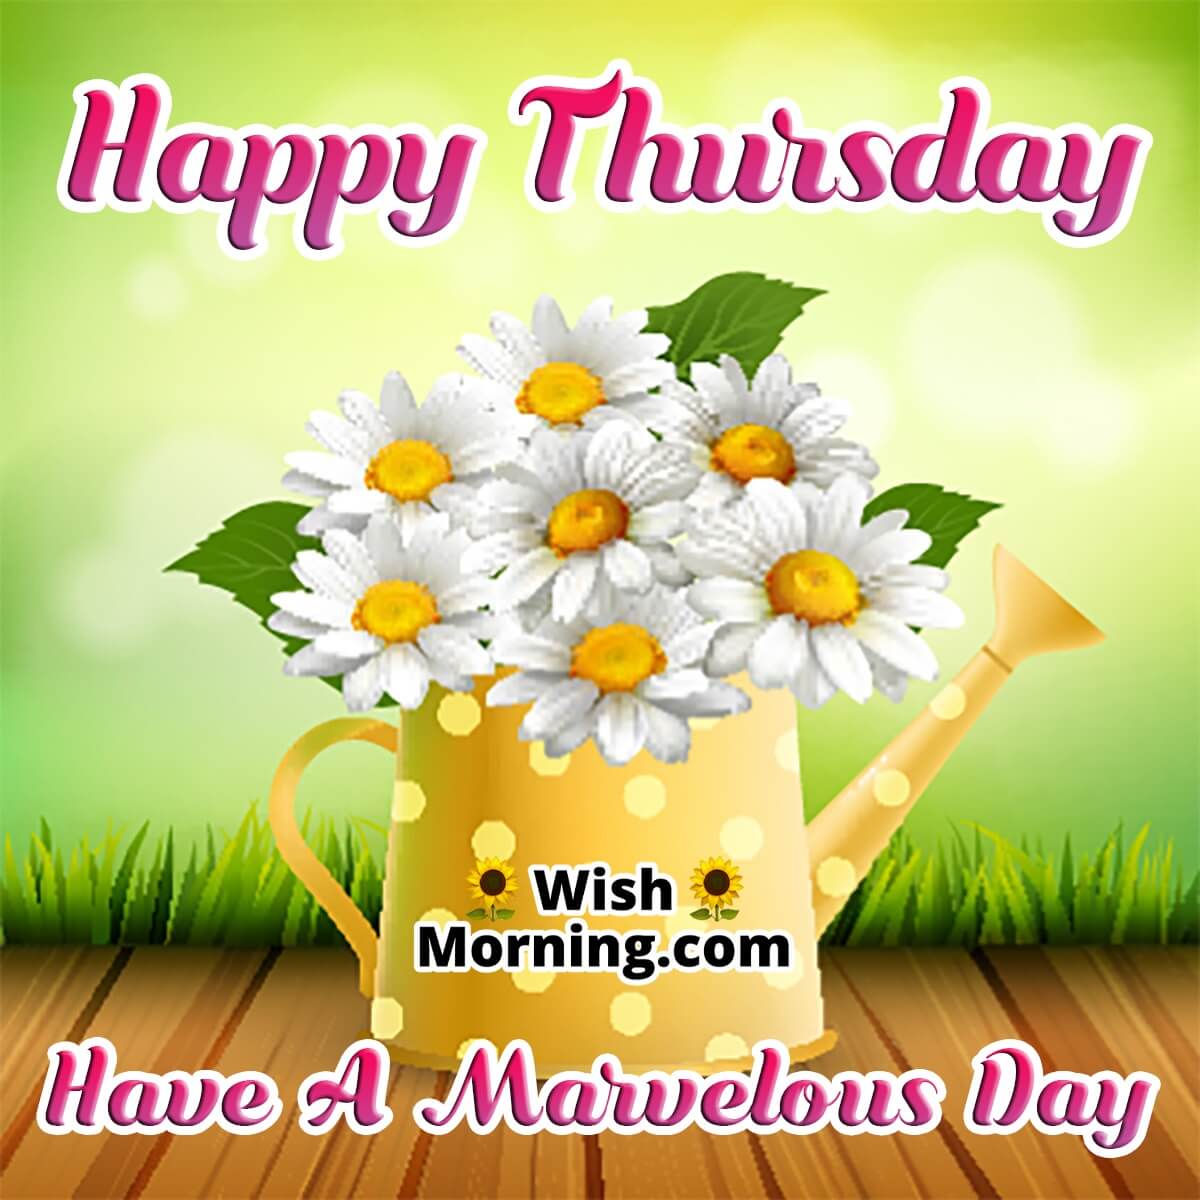 Have A Marvelous Thursday day